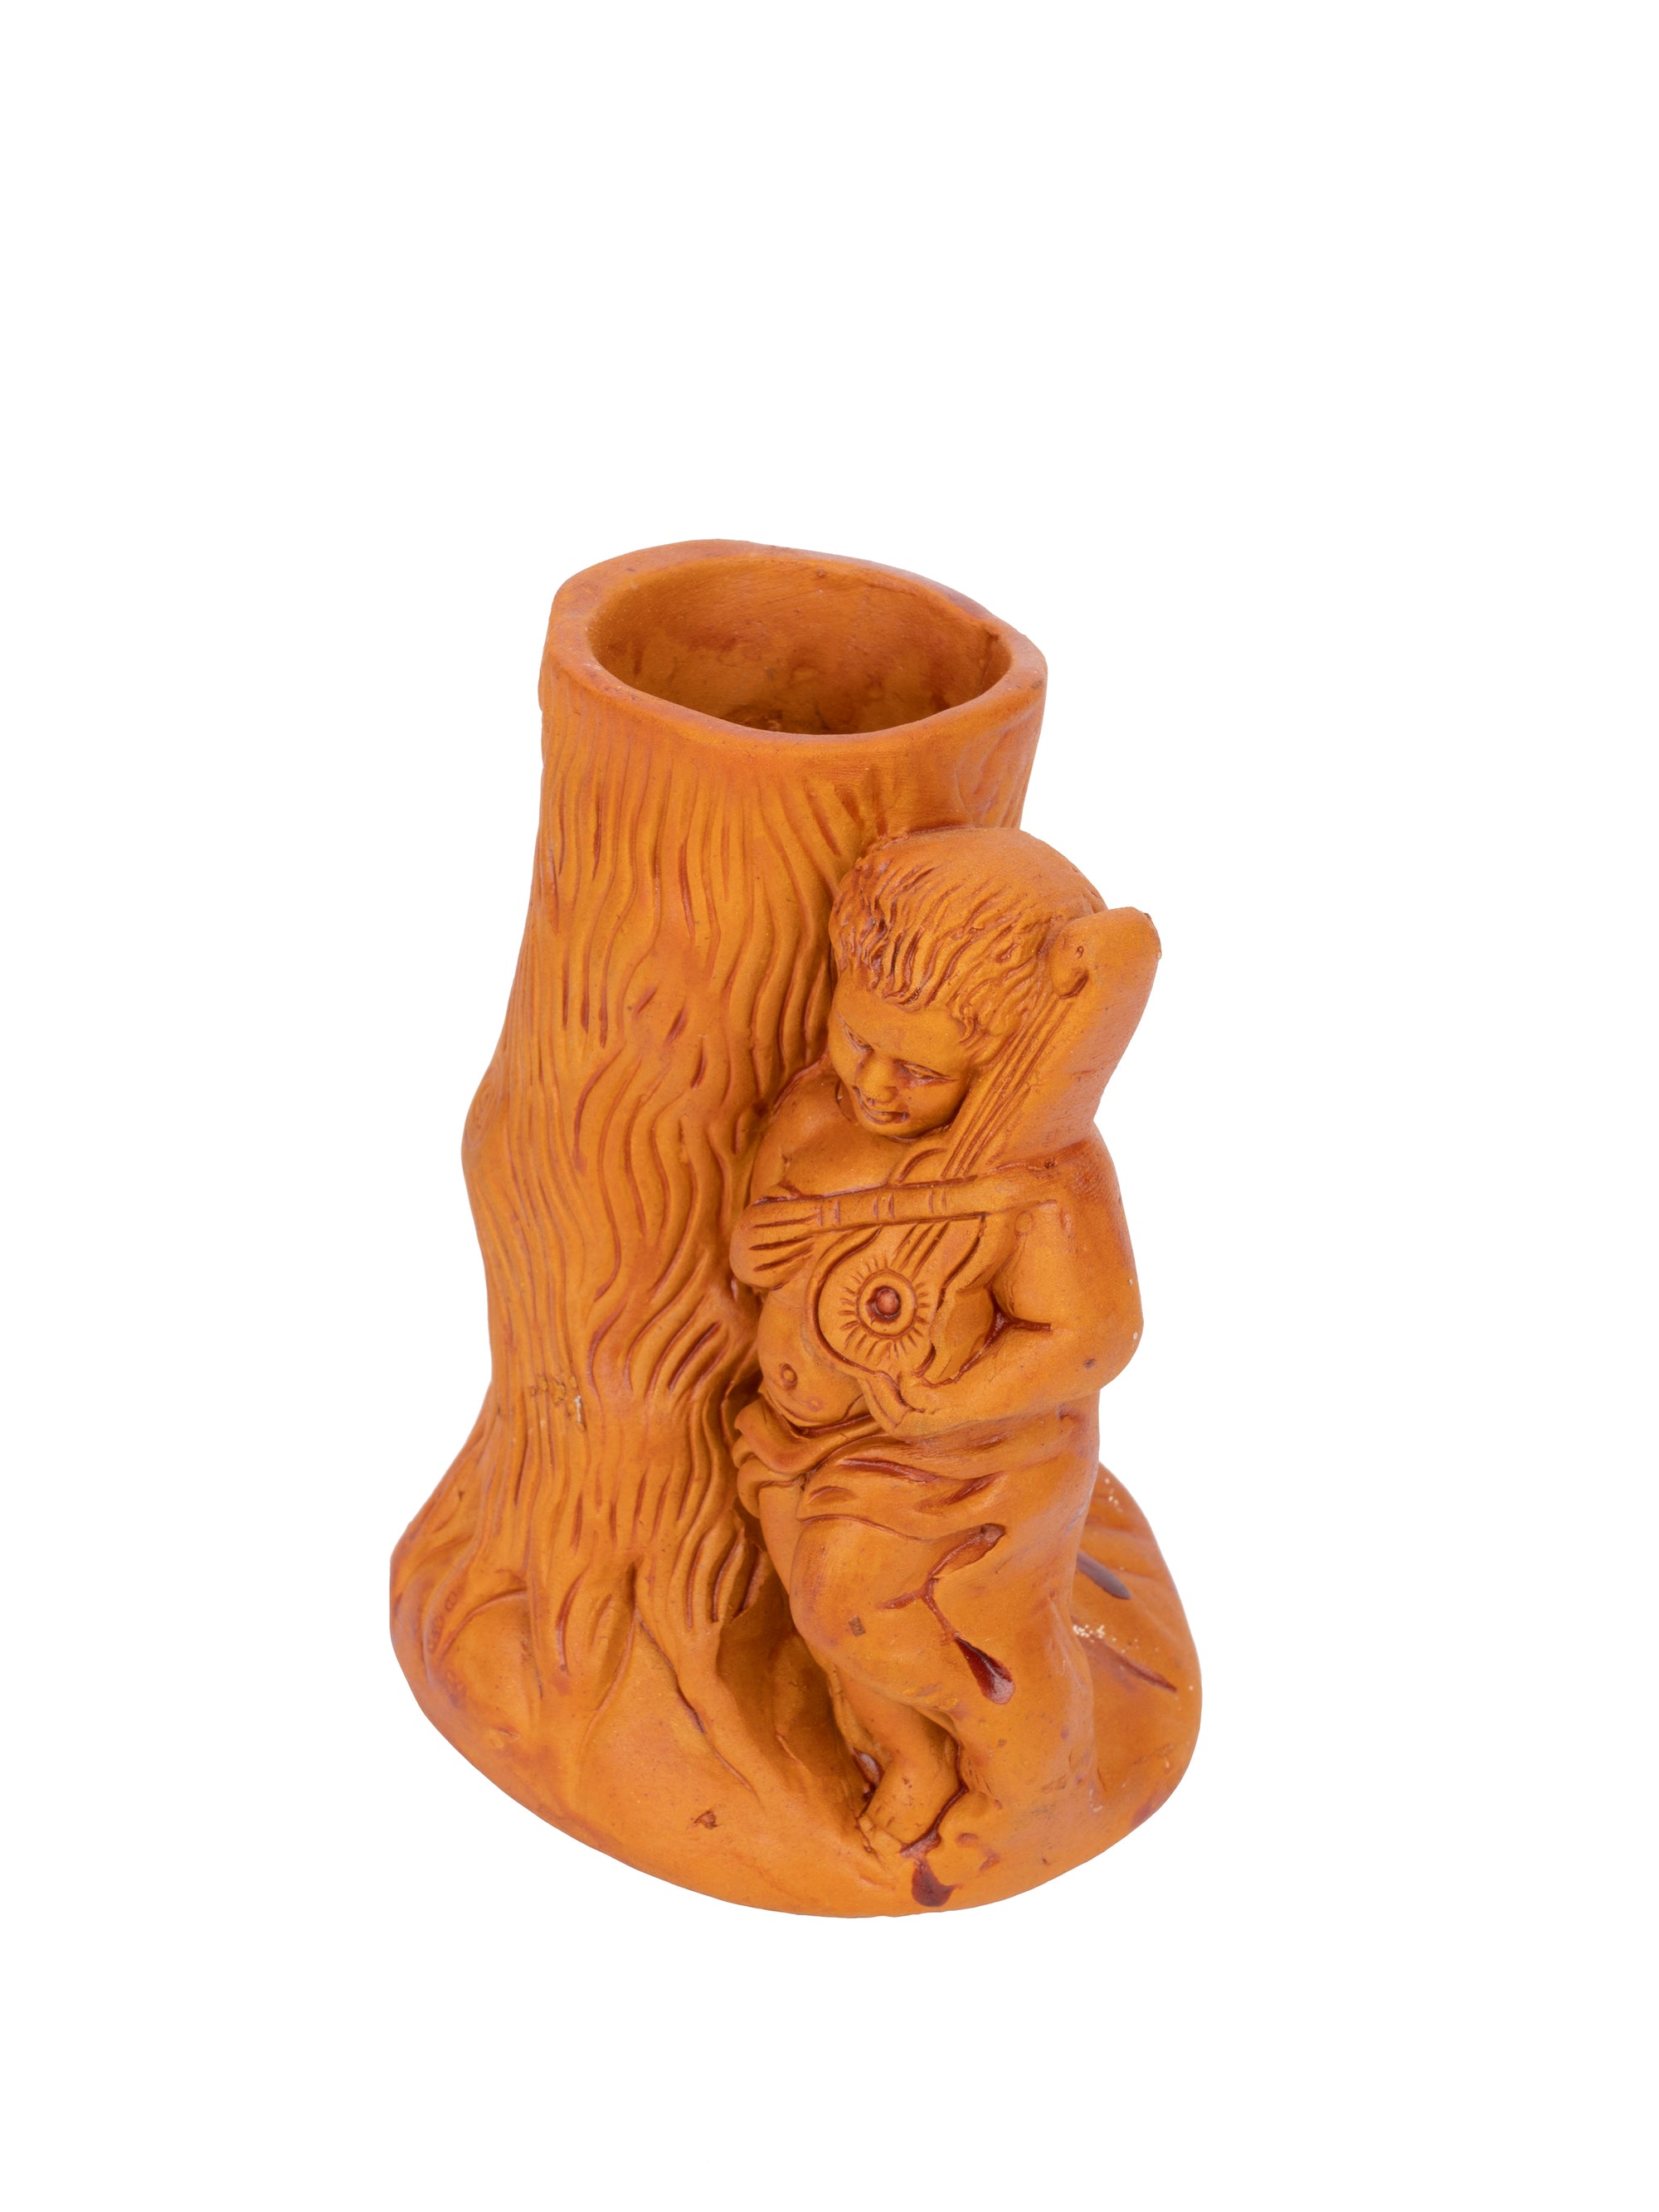 Terracotta Pen Stand in Wooden Tree shape - 5 inches height - The Heritage Artifacts